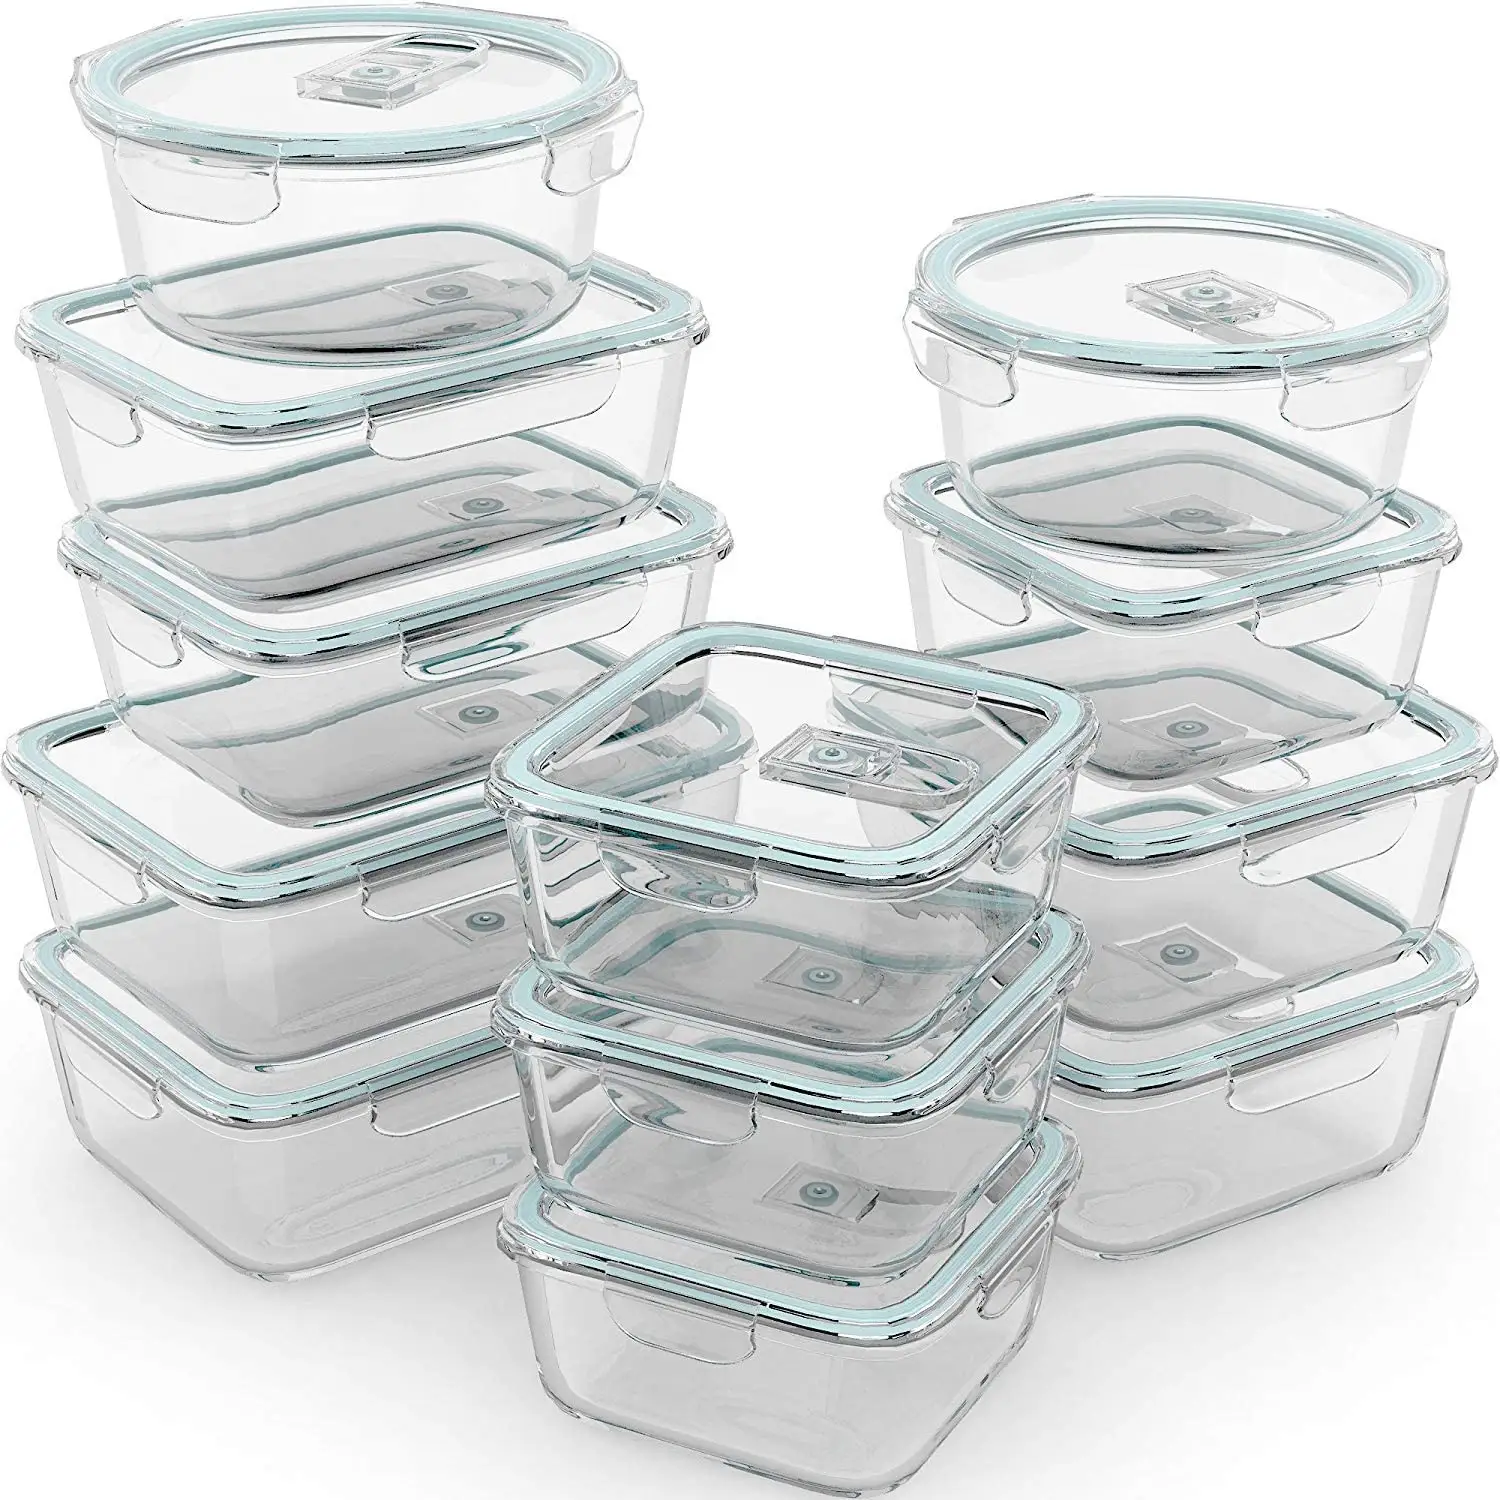 BPA/PVC Free Glass Containers For Food Storage Box Small & Large Reusable Round, Square & Rectangular Bento Containers